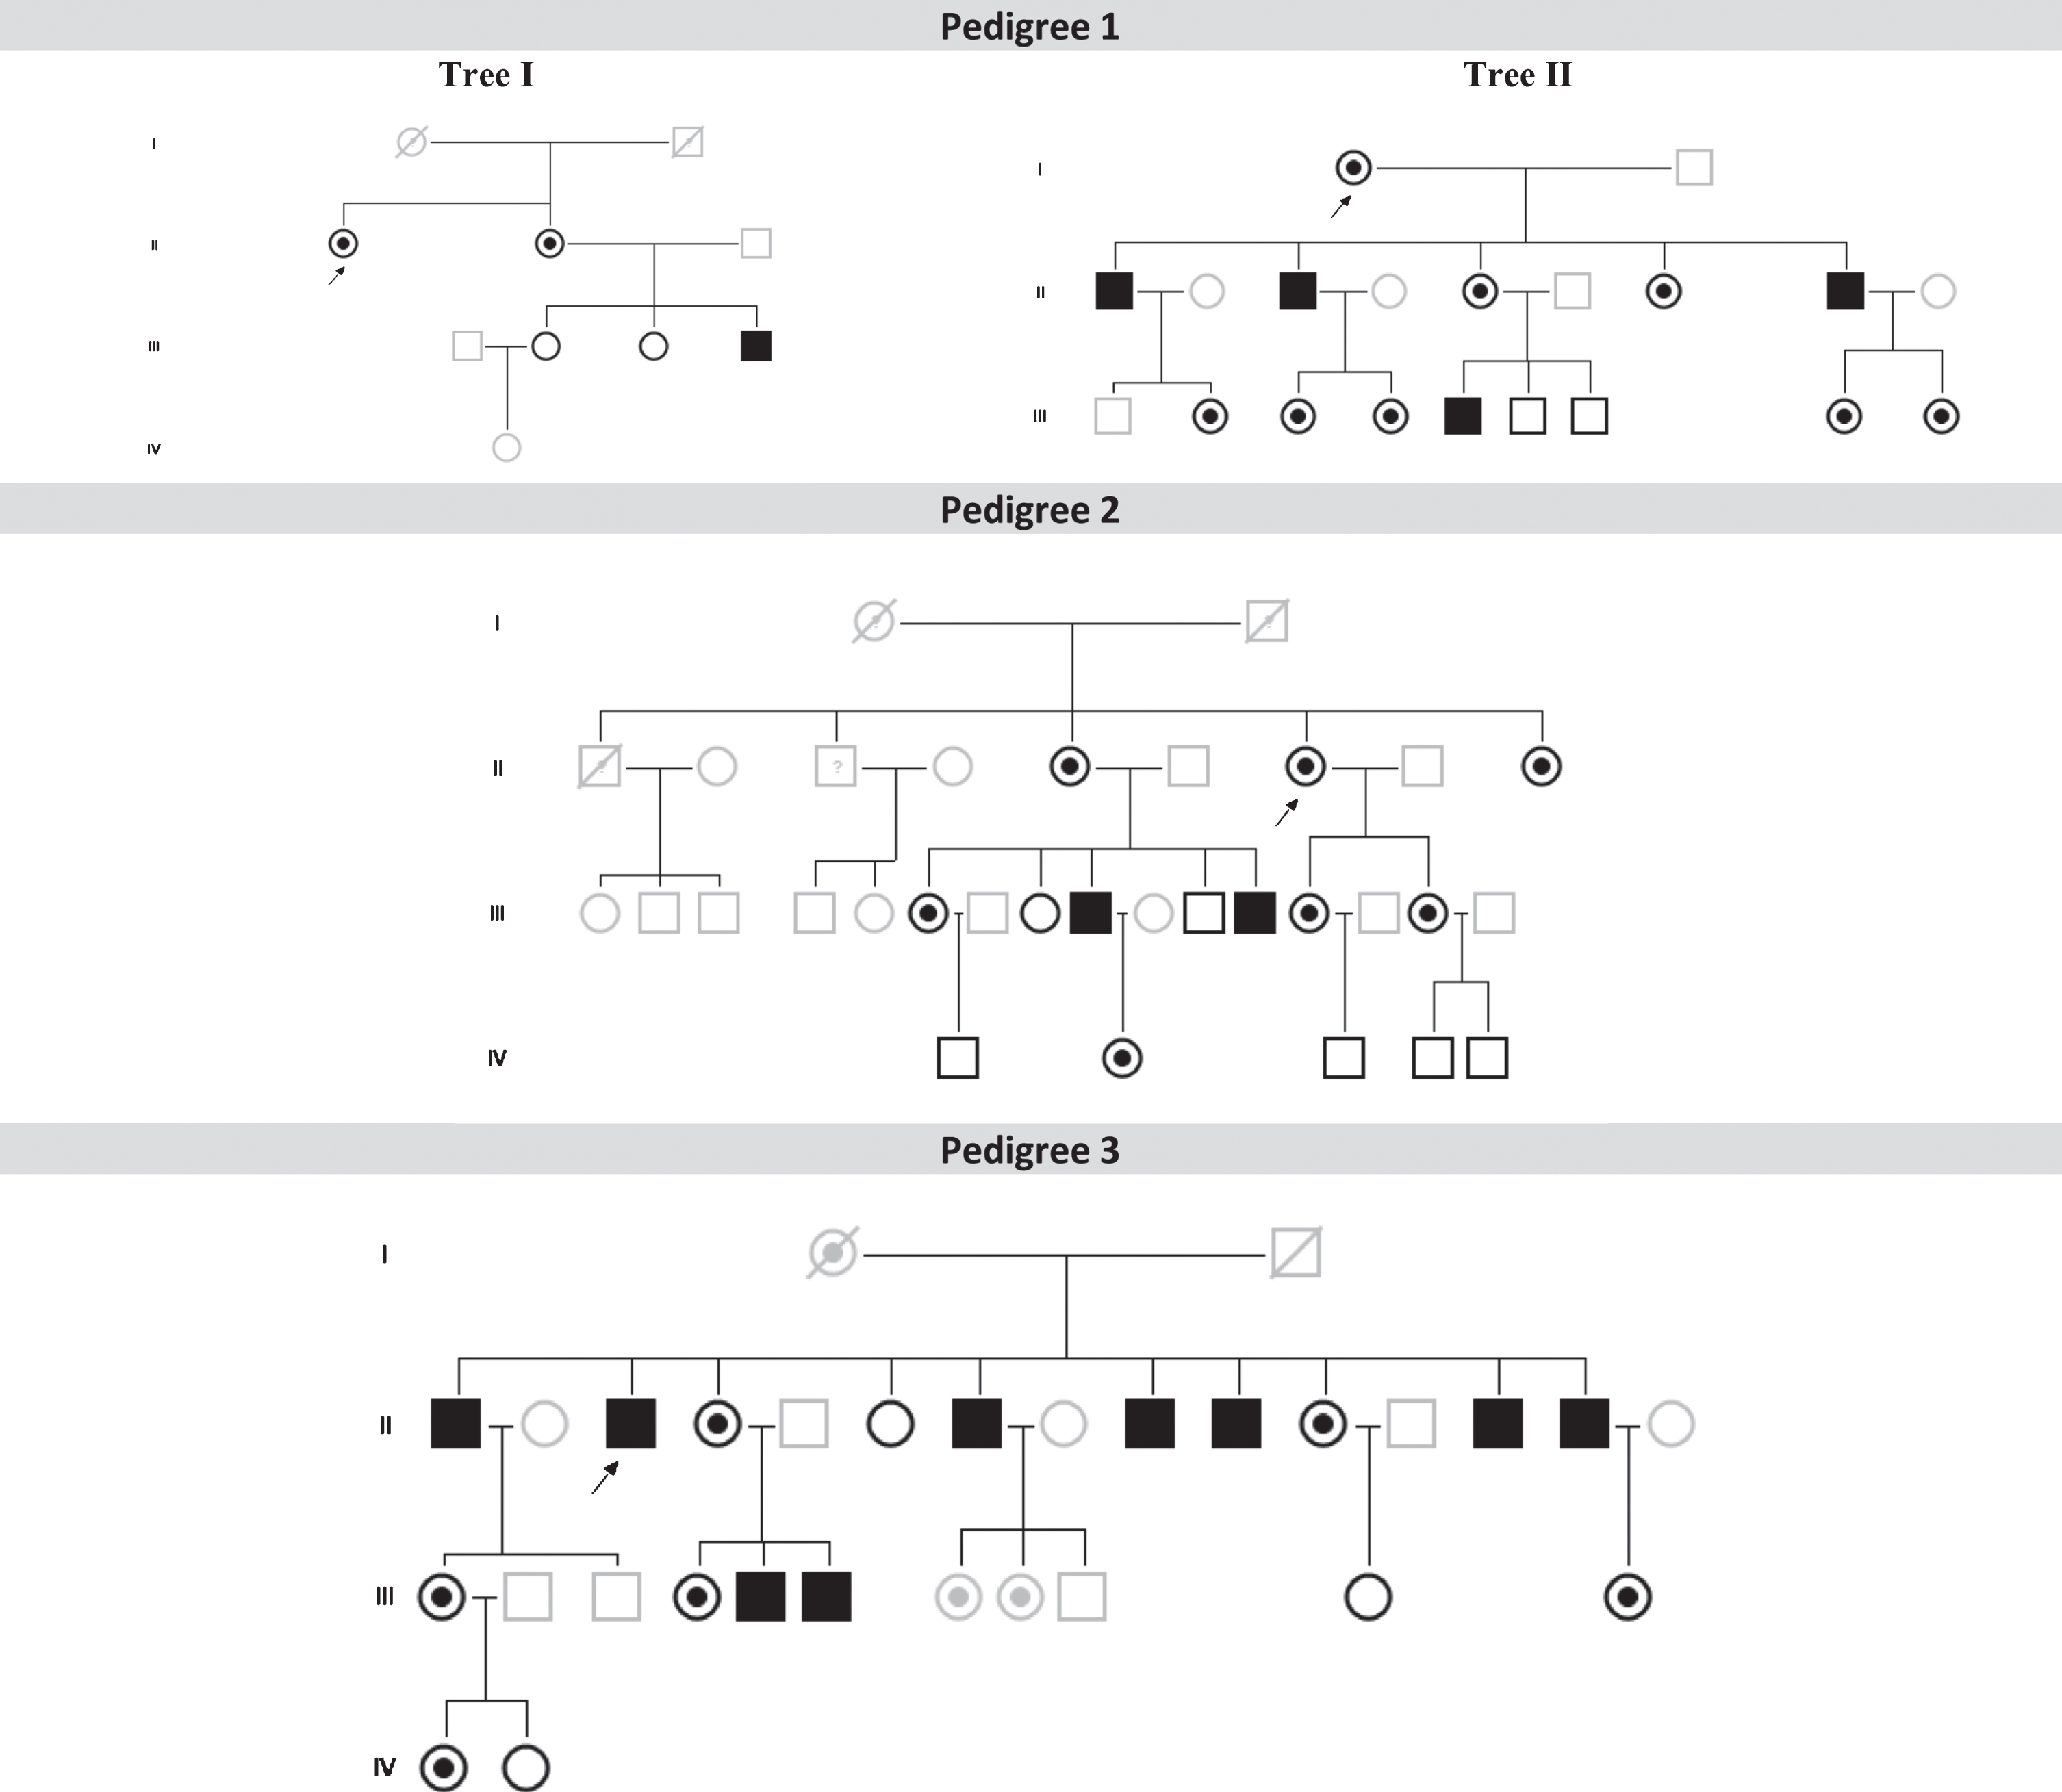 Family pedigrees from the three patients with Parkinson’s disease patients and Fabry disease (FD+PD+) (p. F113L mutation) and their relatives with or without FD. Index FD patients are marked with a black arrow (in Pedigree 1, individuals II-1 from Tree I and I-1 from Tree II are the same index patient). Patients with FD and PD: P1 (Pedigree 1, tree I, II-2); Patient 2 (Pedigree 2, III-9); Patient 3 (Pedigree 3, II-1). Dark symbols represent FD patients. White symbols represent relatives without FD. Grey symbols represent untested individuals.